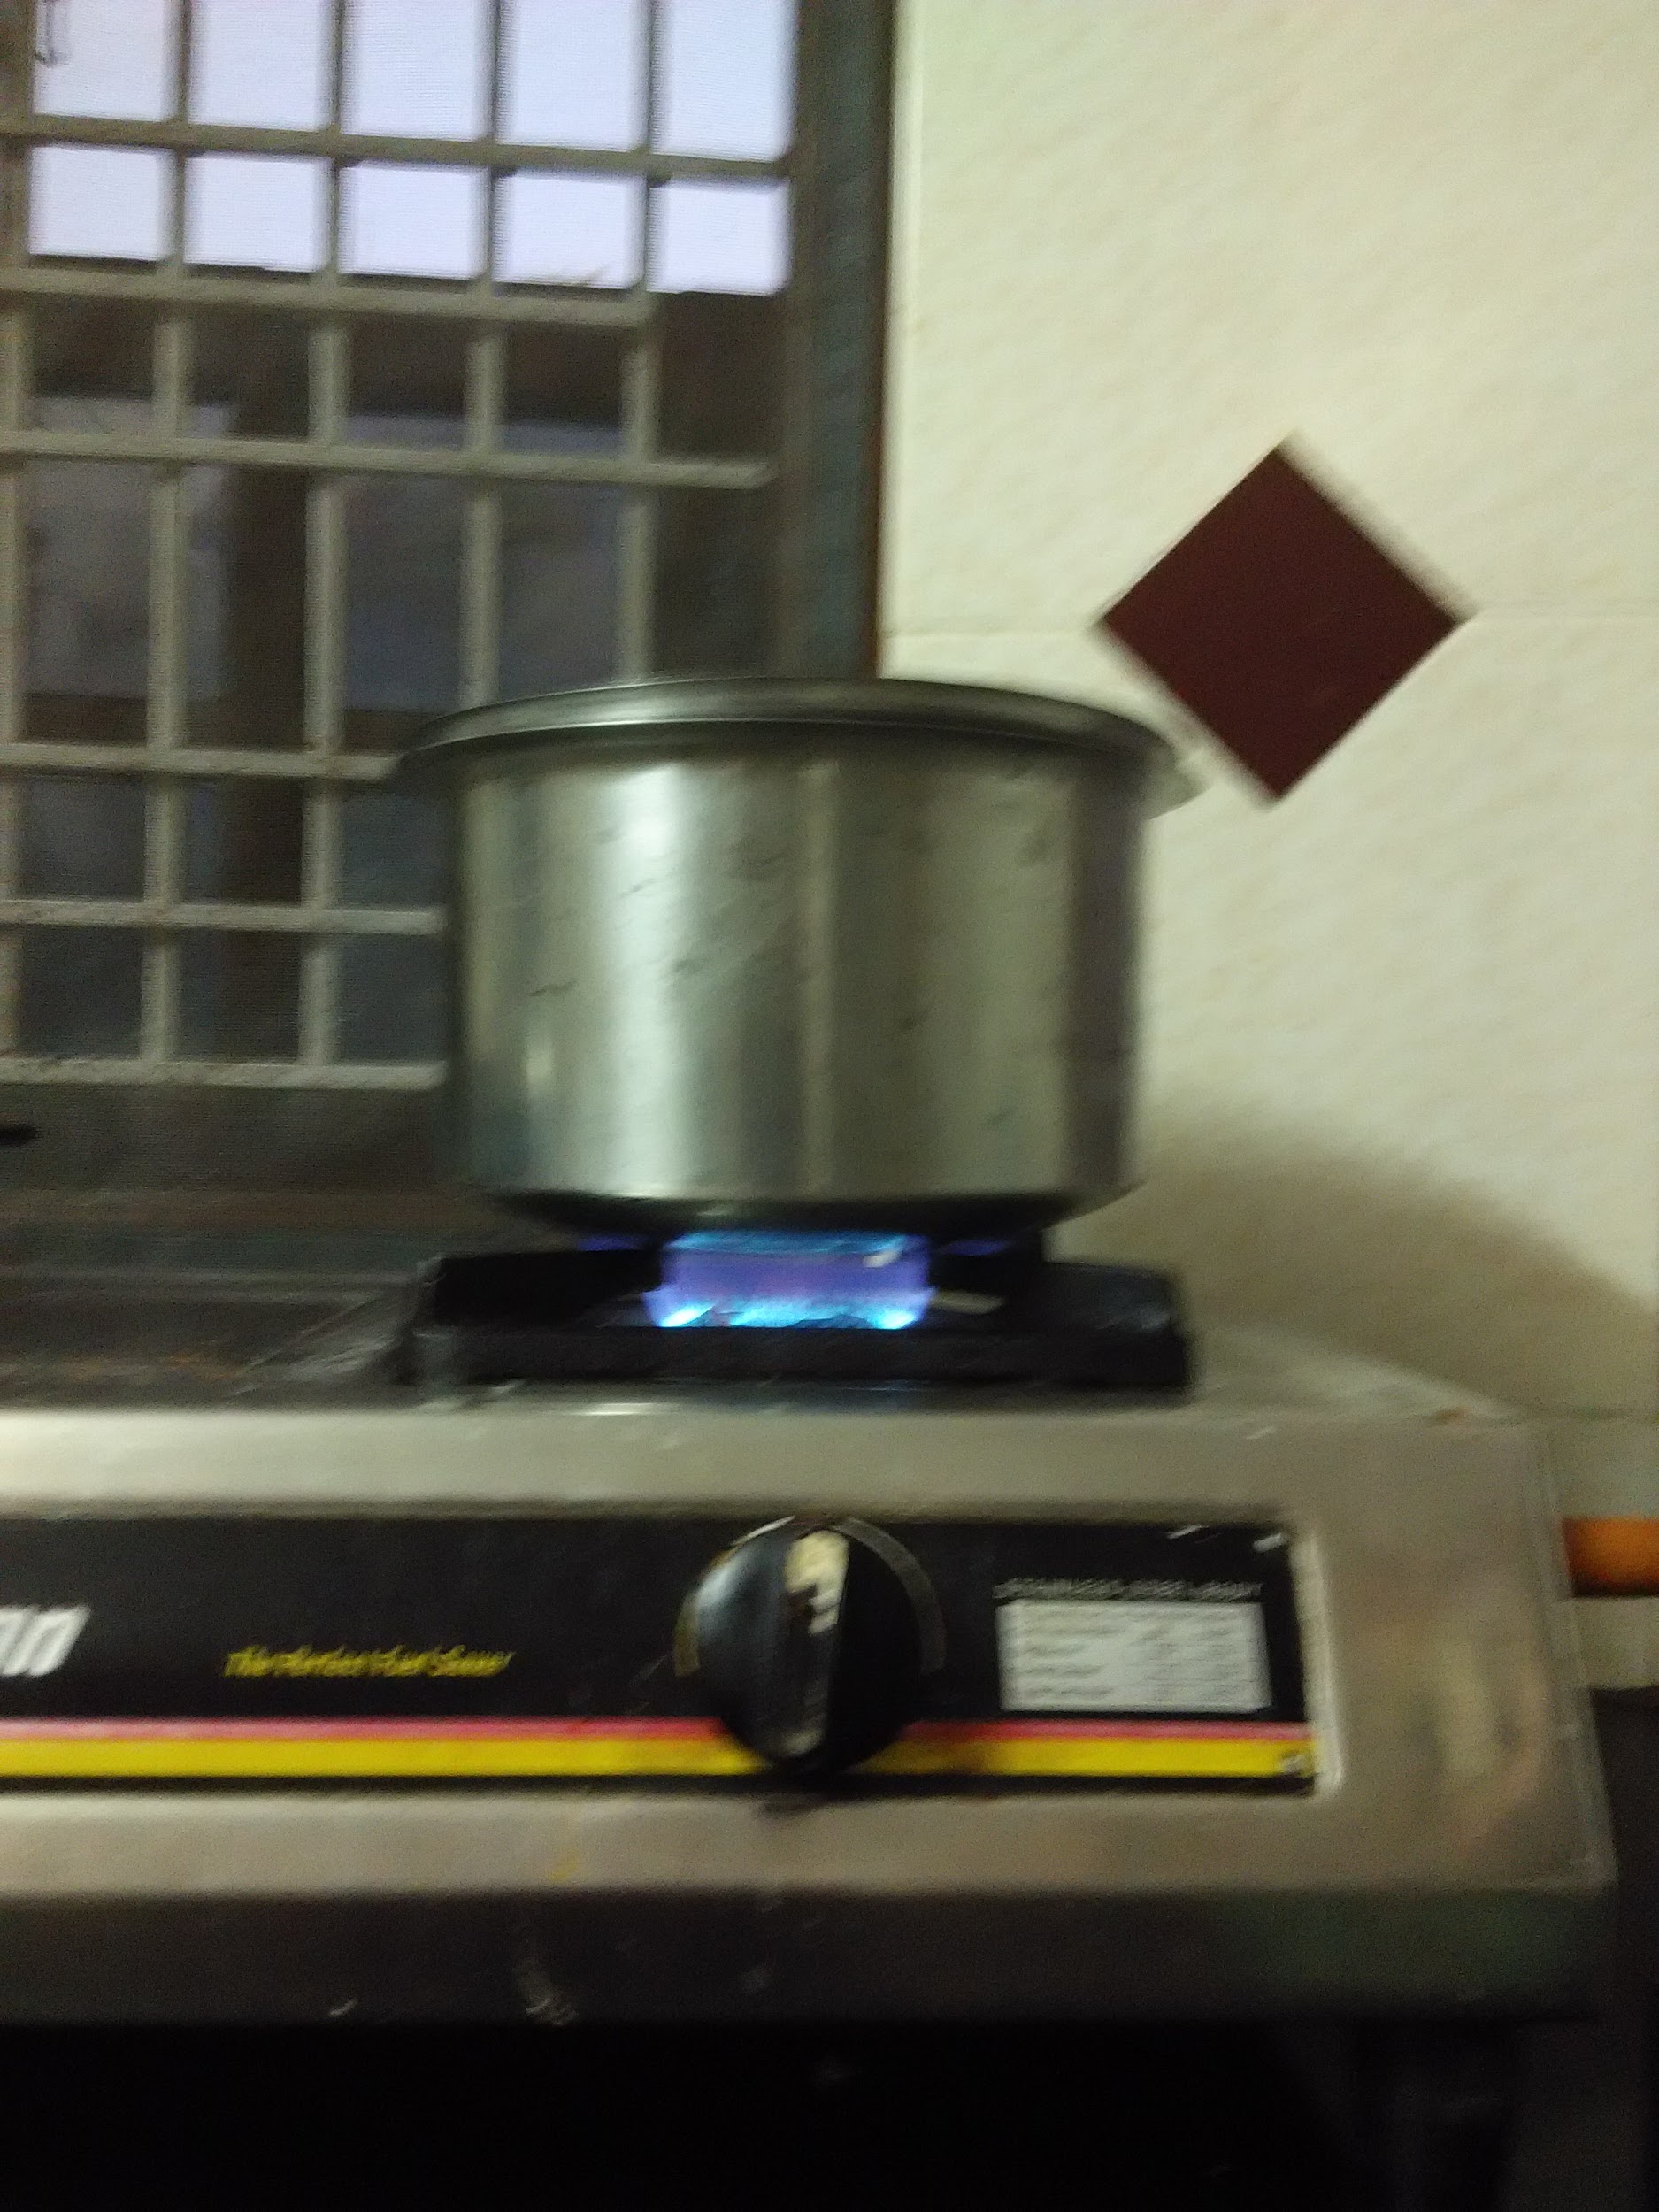 Example of an LPG stove at Indian households